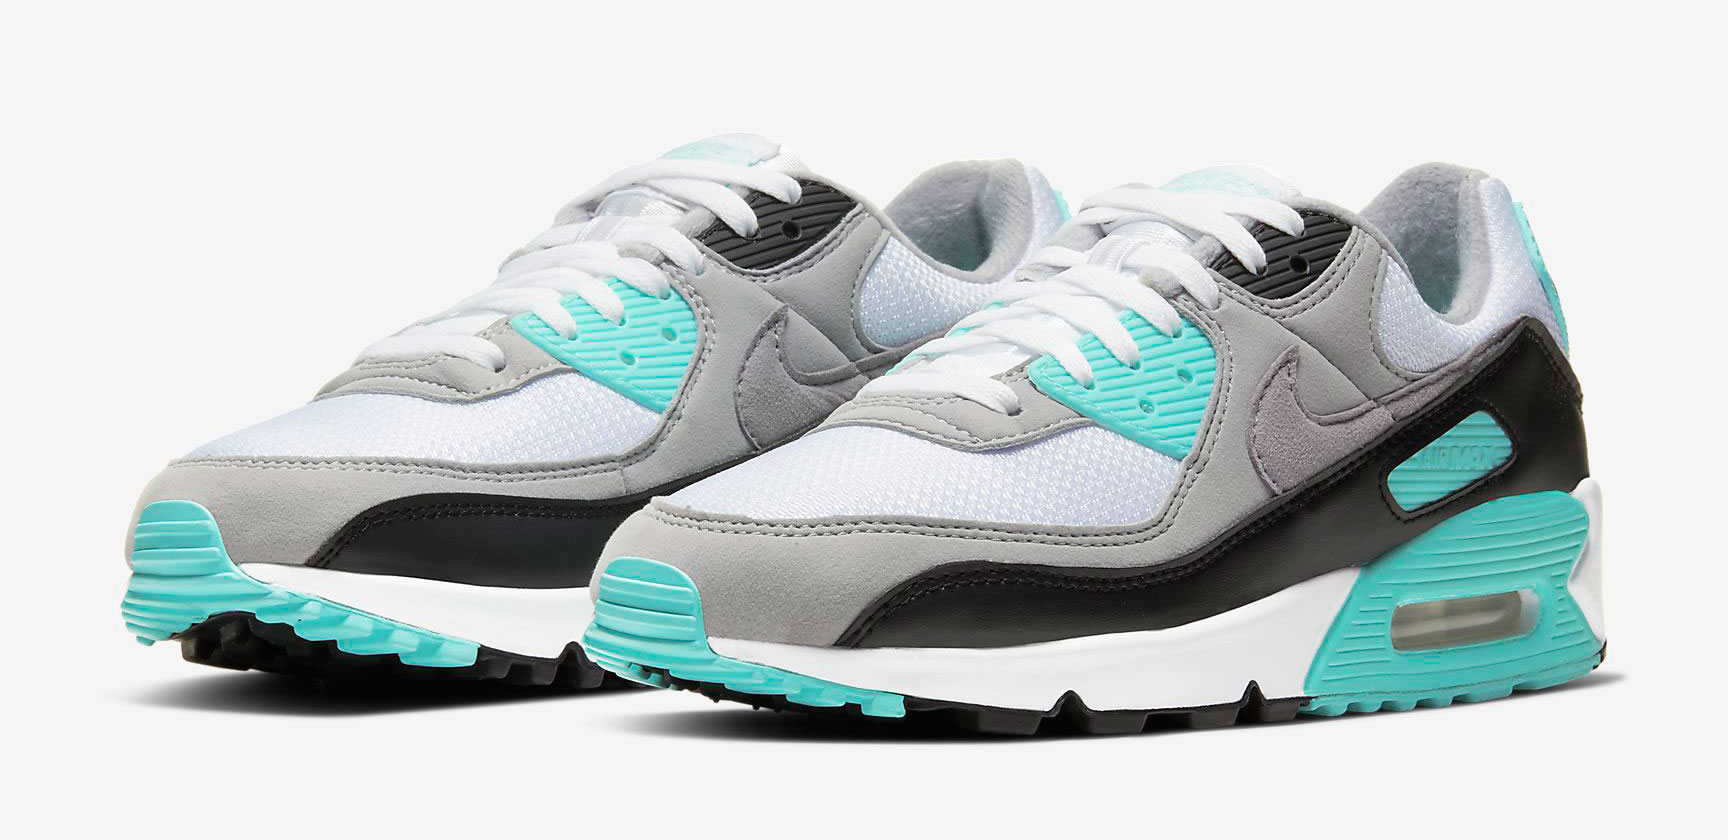 nike-air-max-90-hyper-turquoise-release-date-price-1